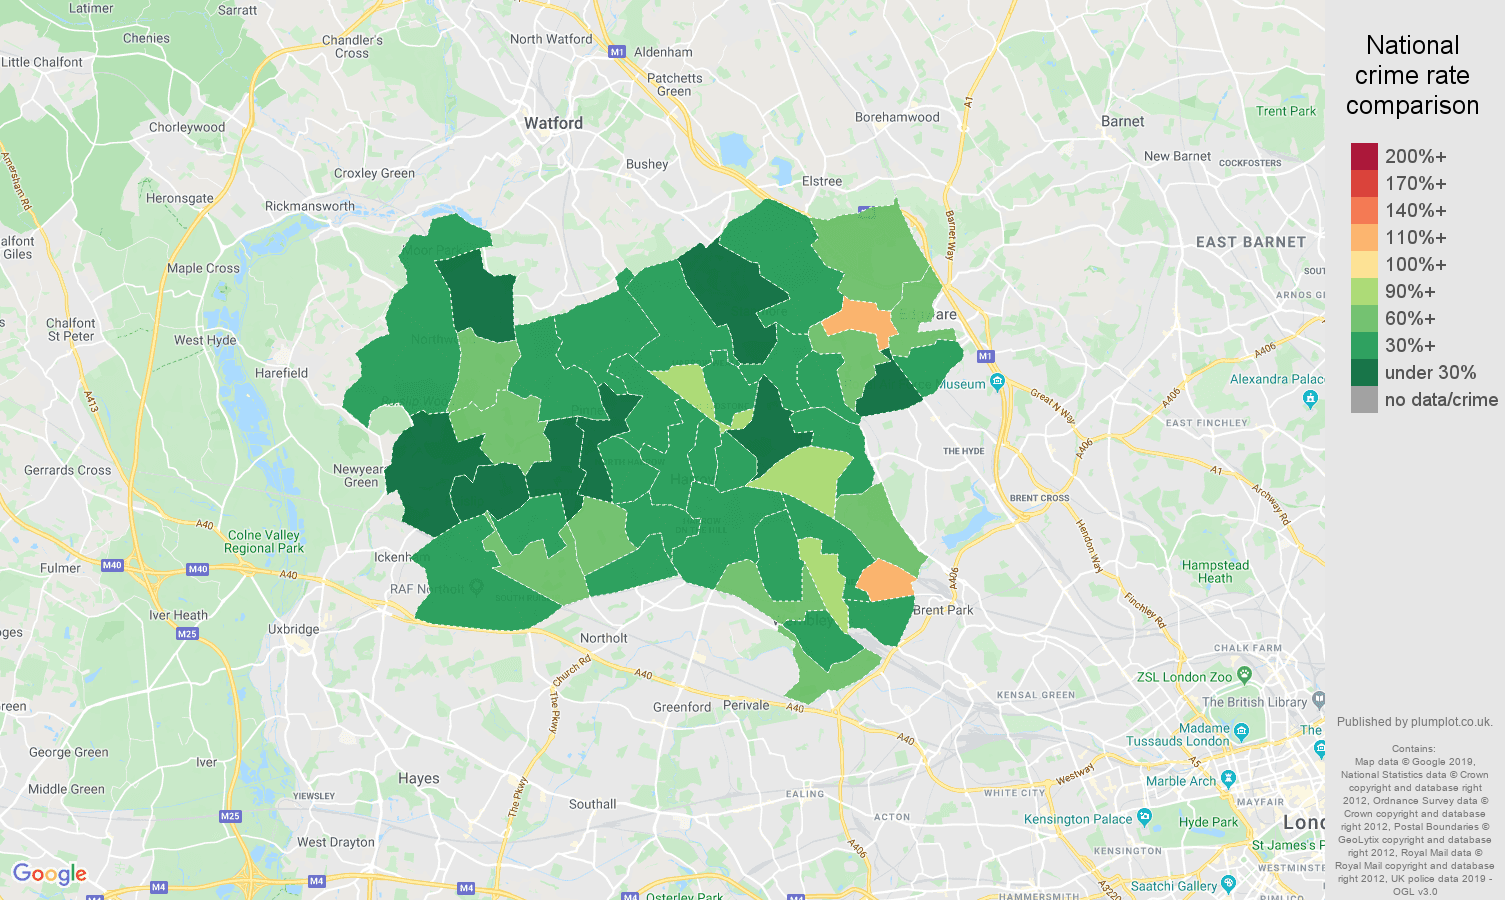 Harrow other crime rate comparison map